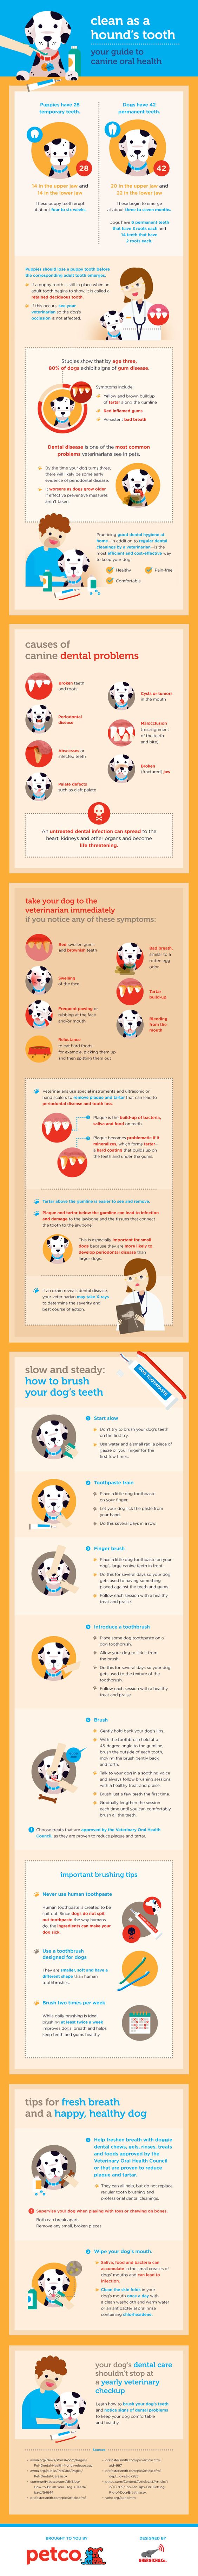 guide to canine oral health